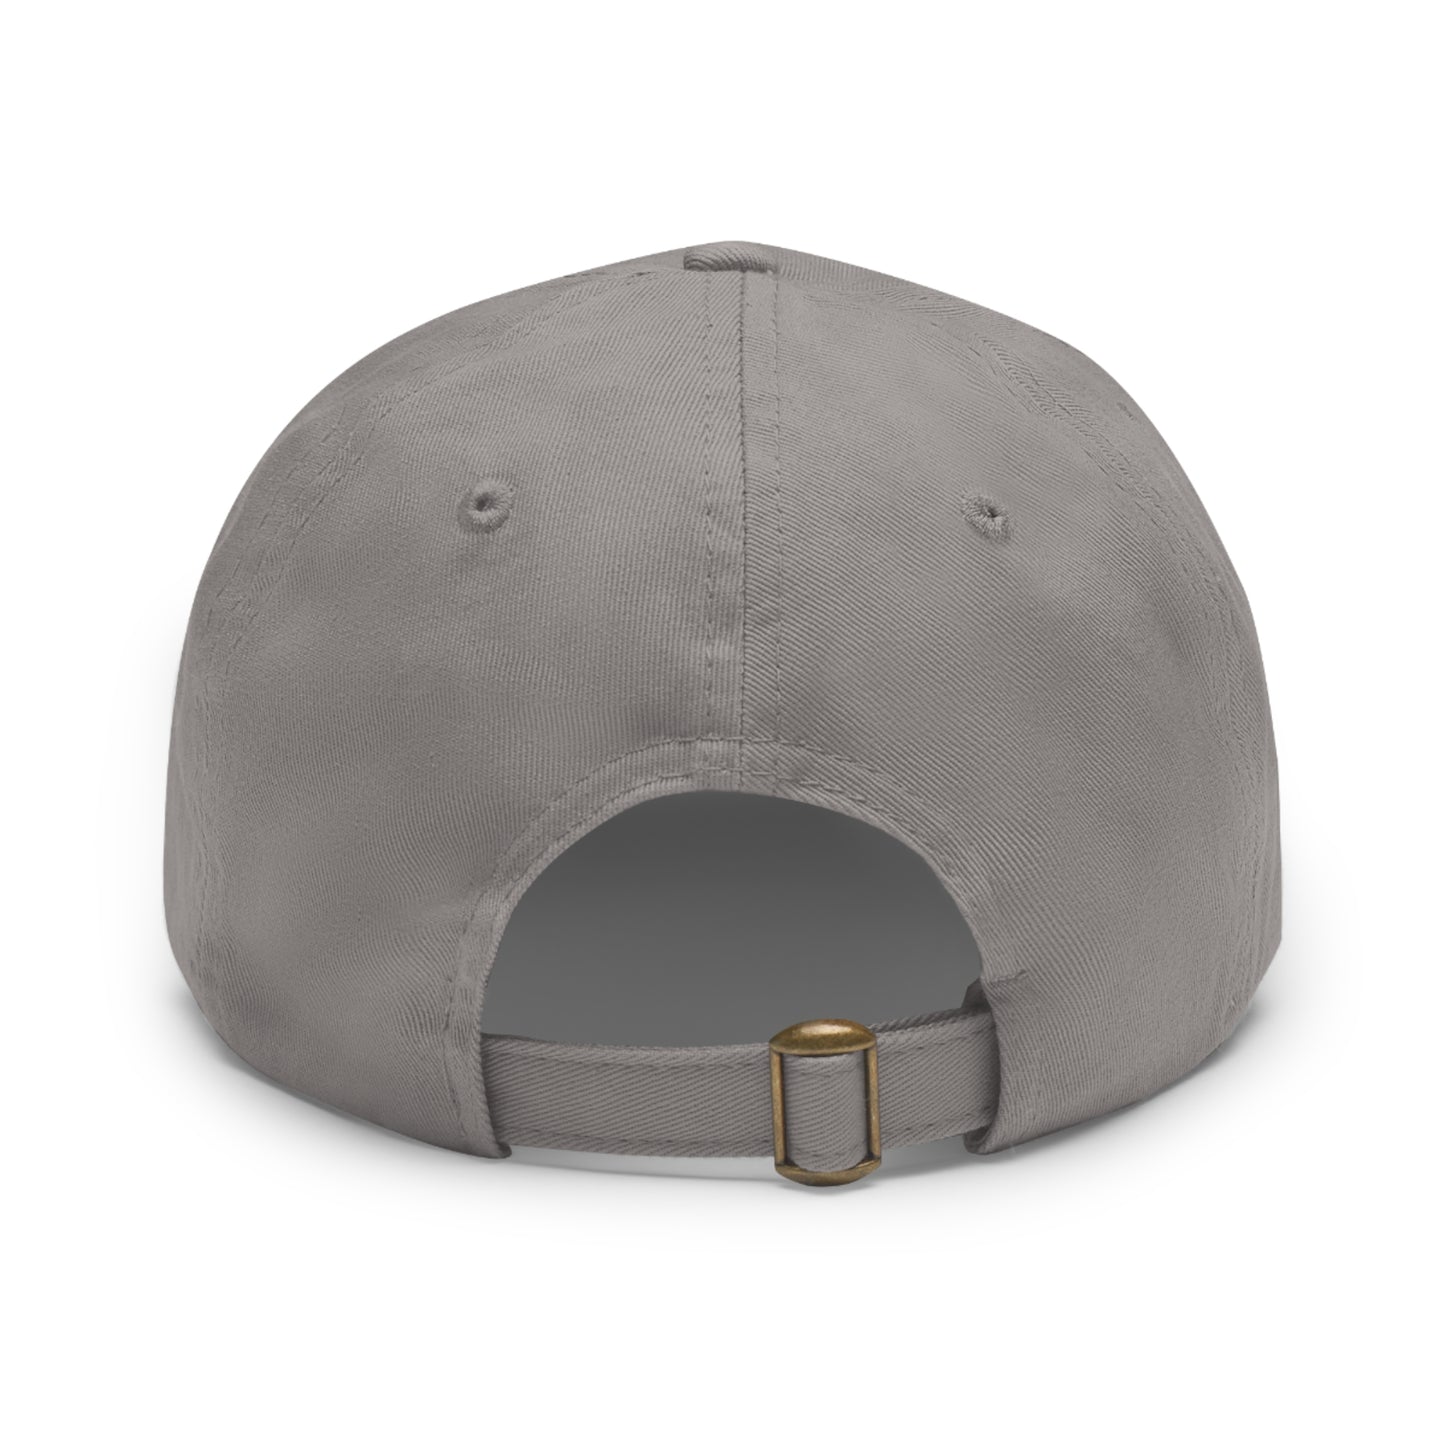 JITD TWISTLER CROSS HAT WITH LEATHER PATCH